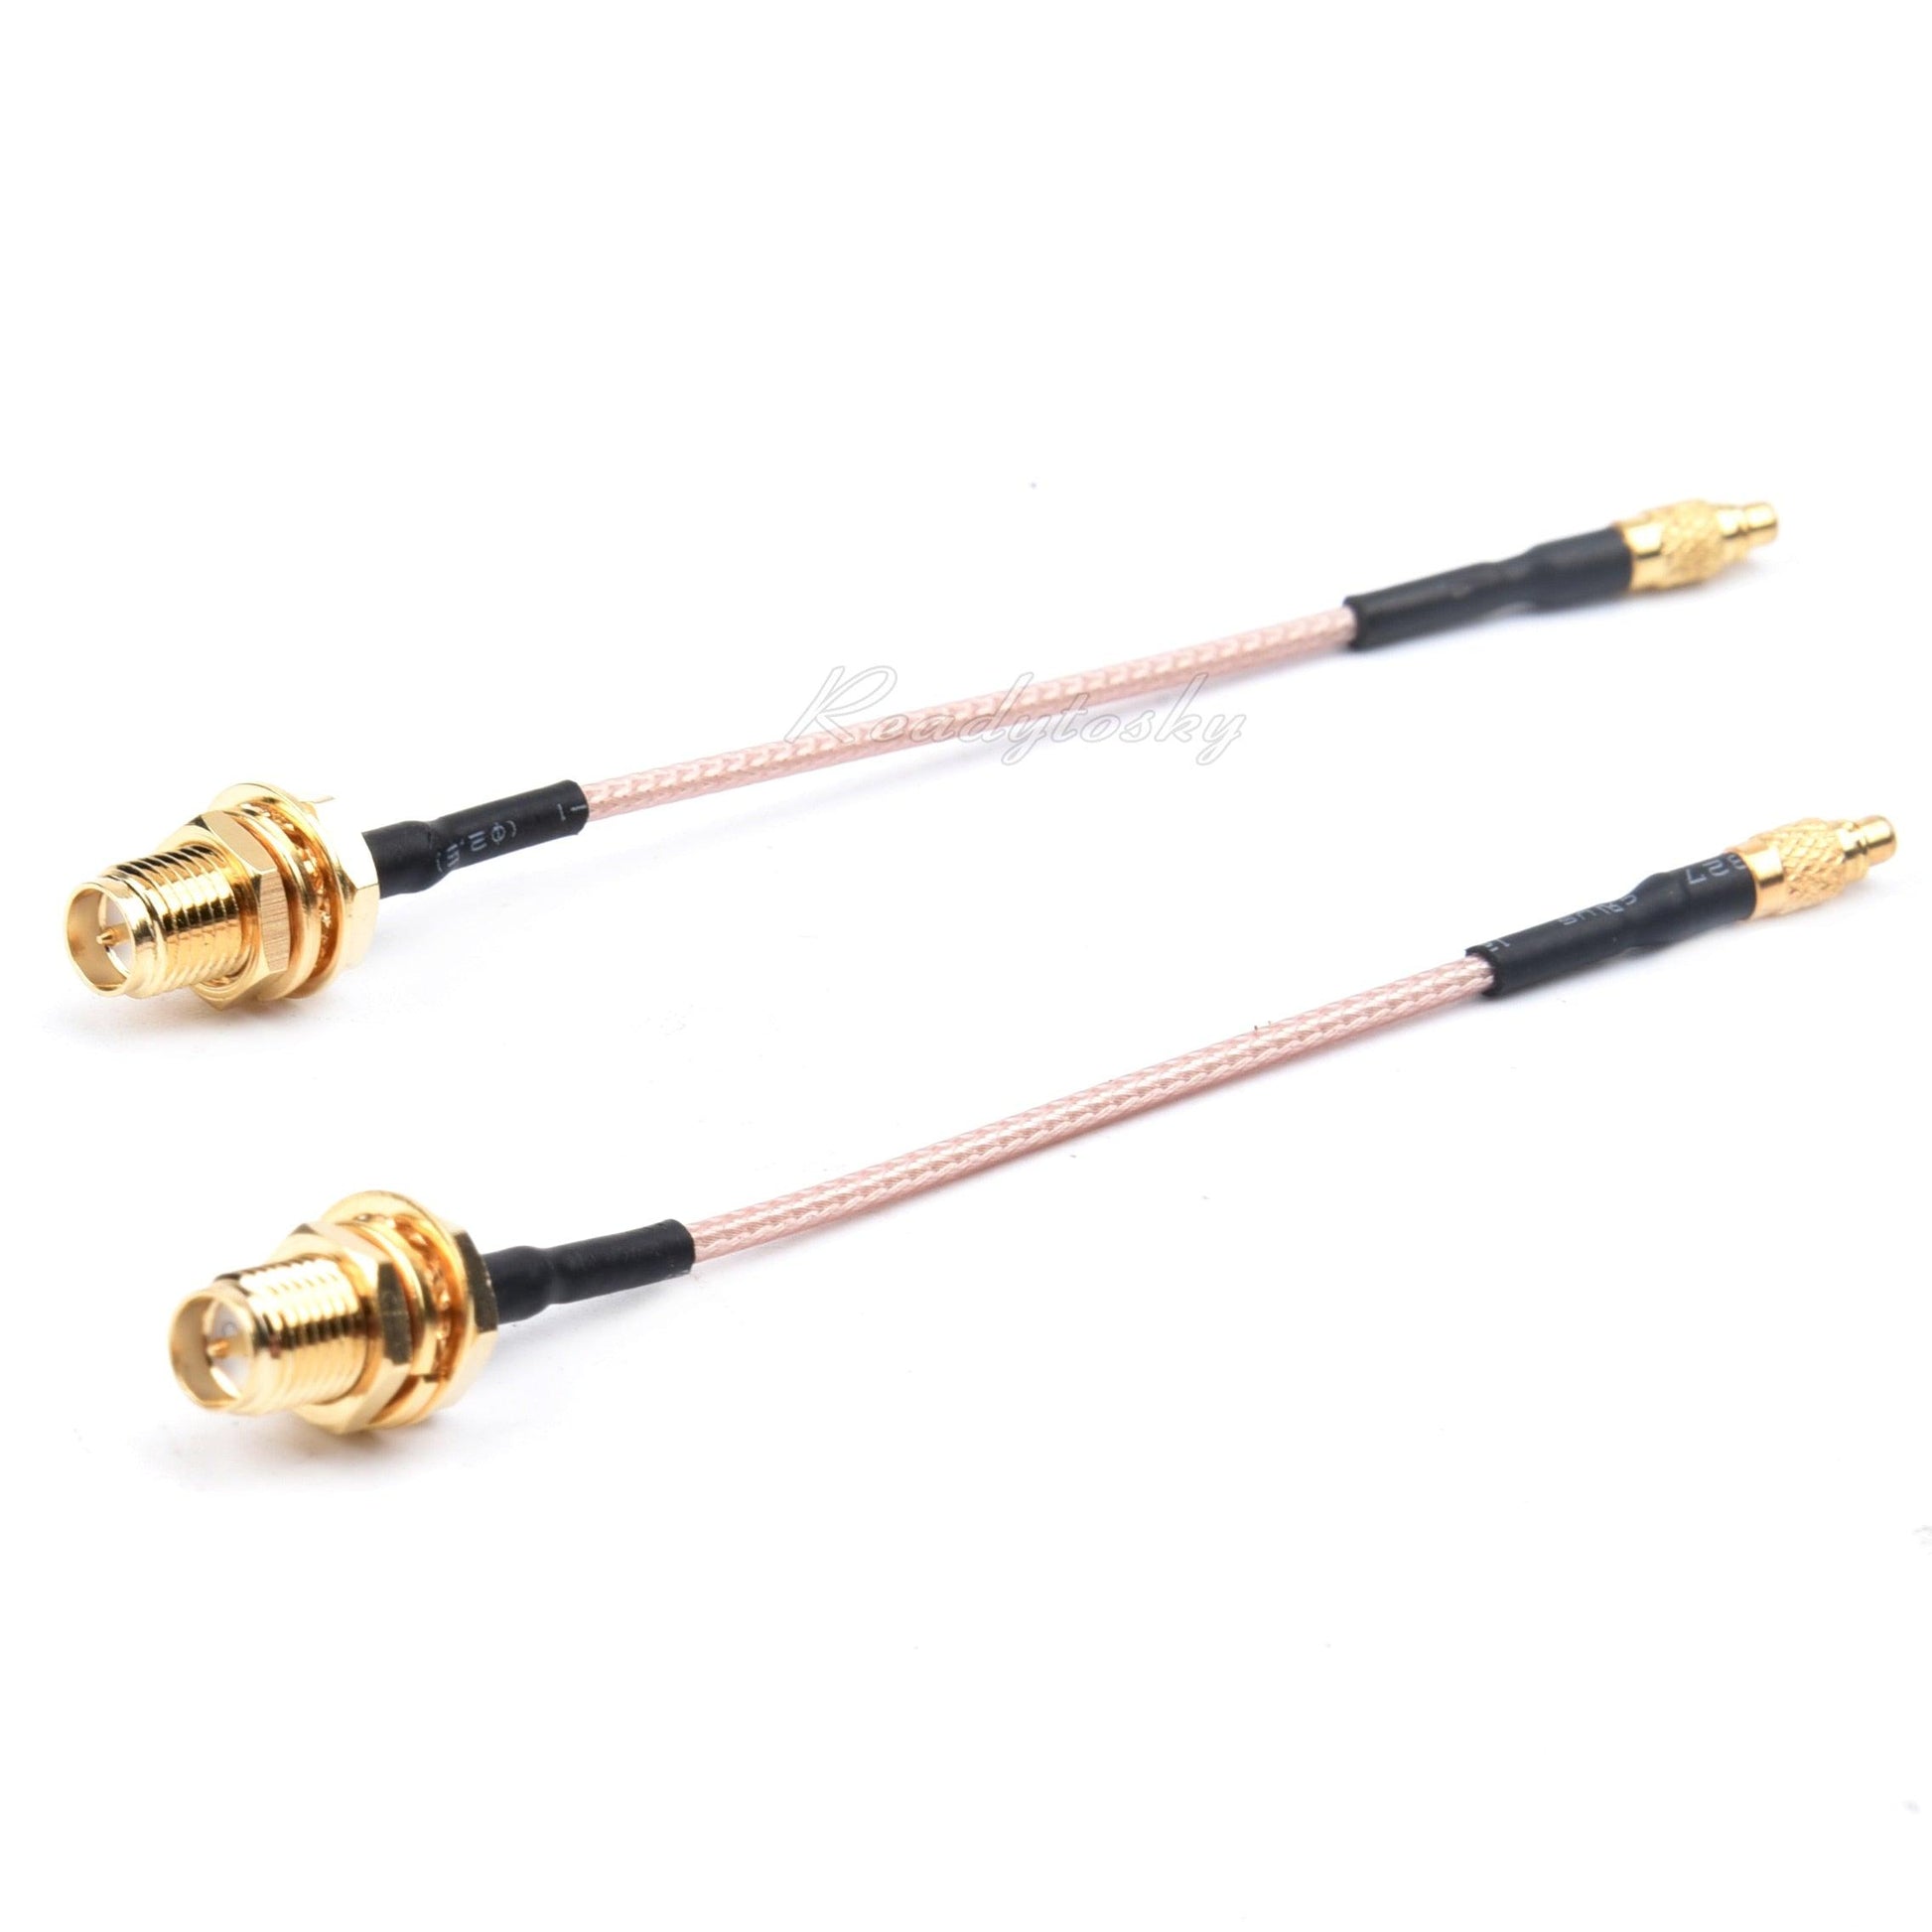 5.8GHz 2.15dBi VTX MMCX Angel / Striaght to SMA Female / RP-SMA Adpater Linear Antenna Flange Connector Cable for PFV RC Drone Parts - RCDrone